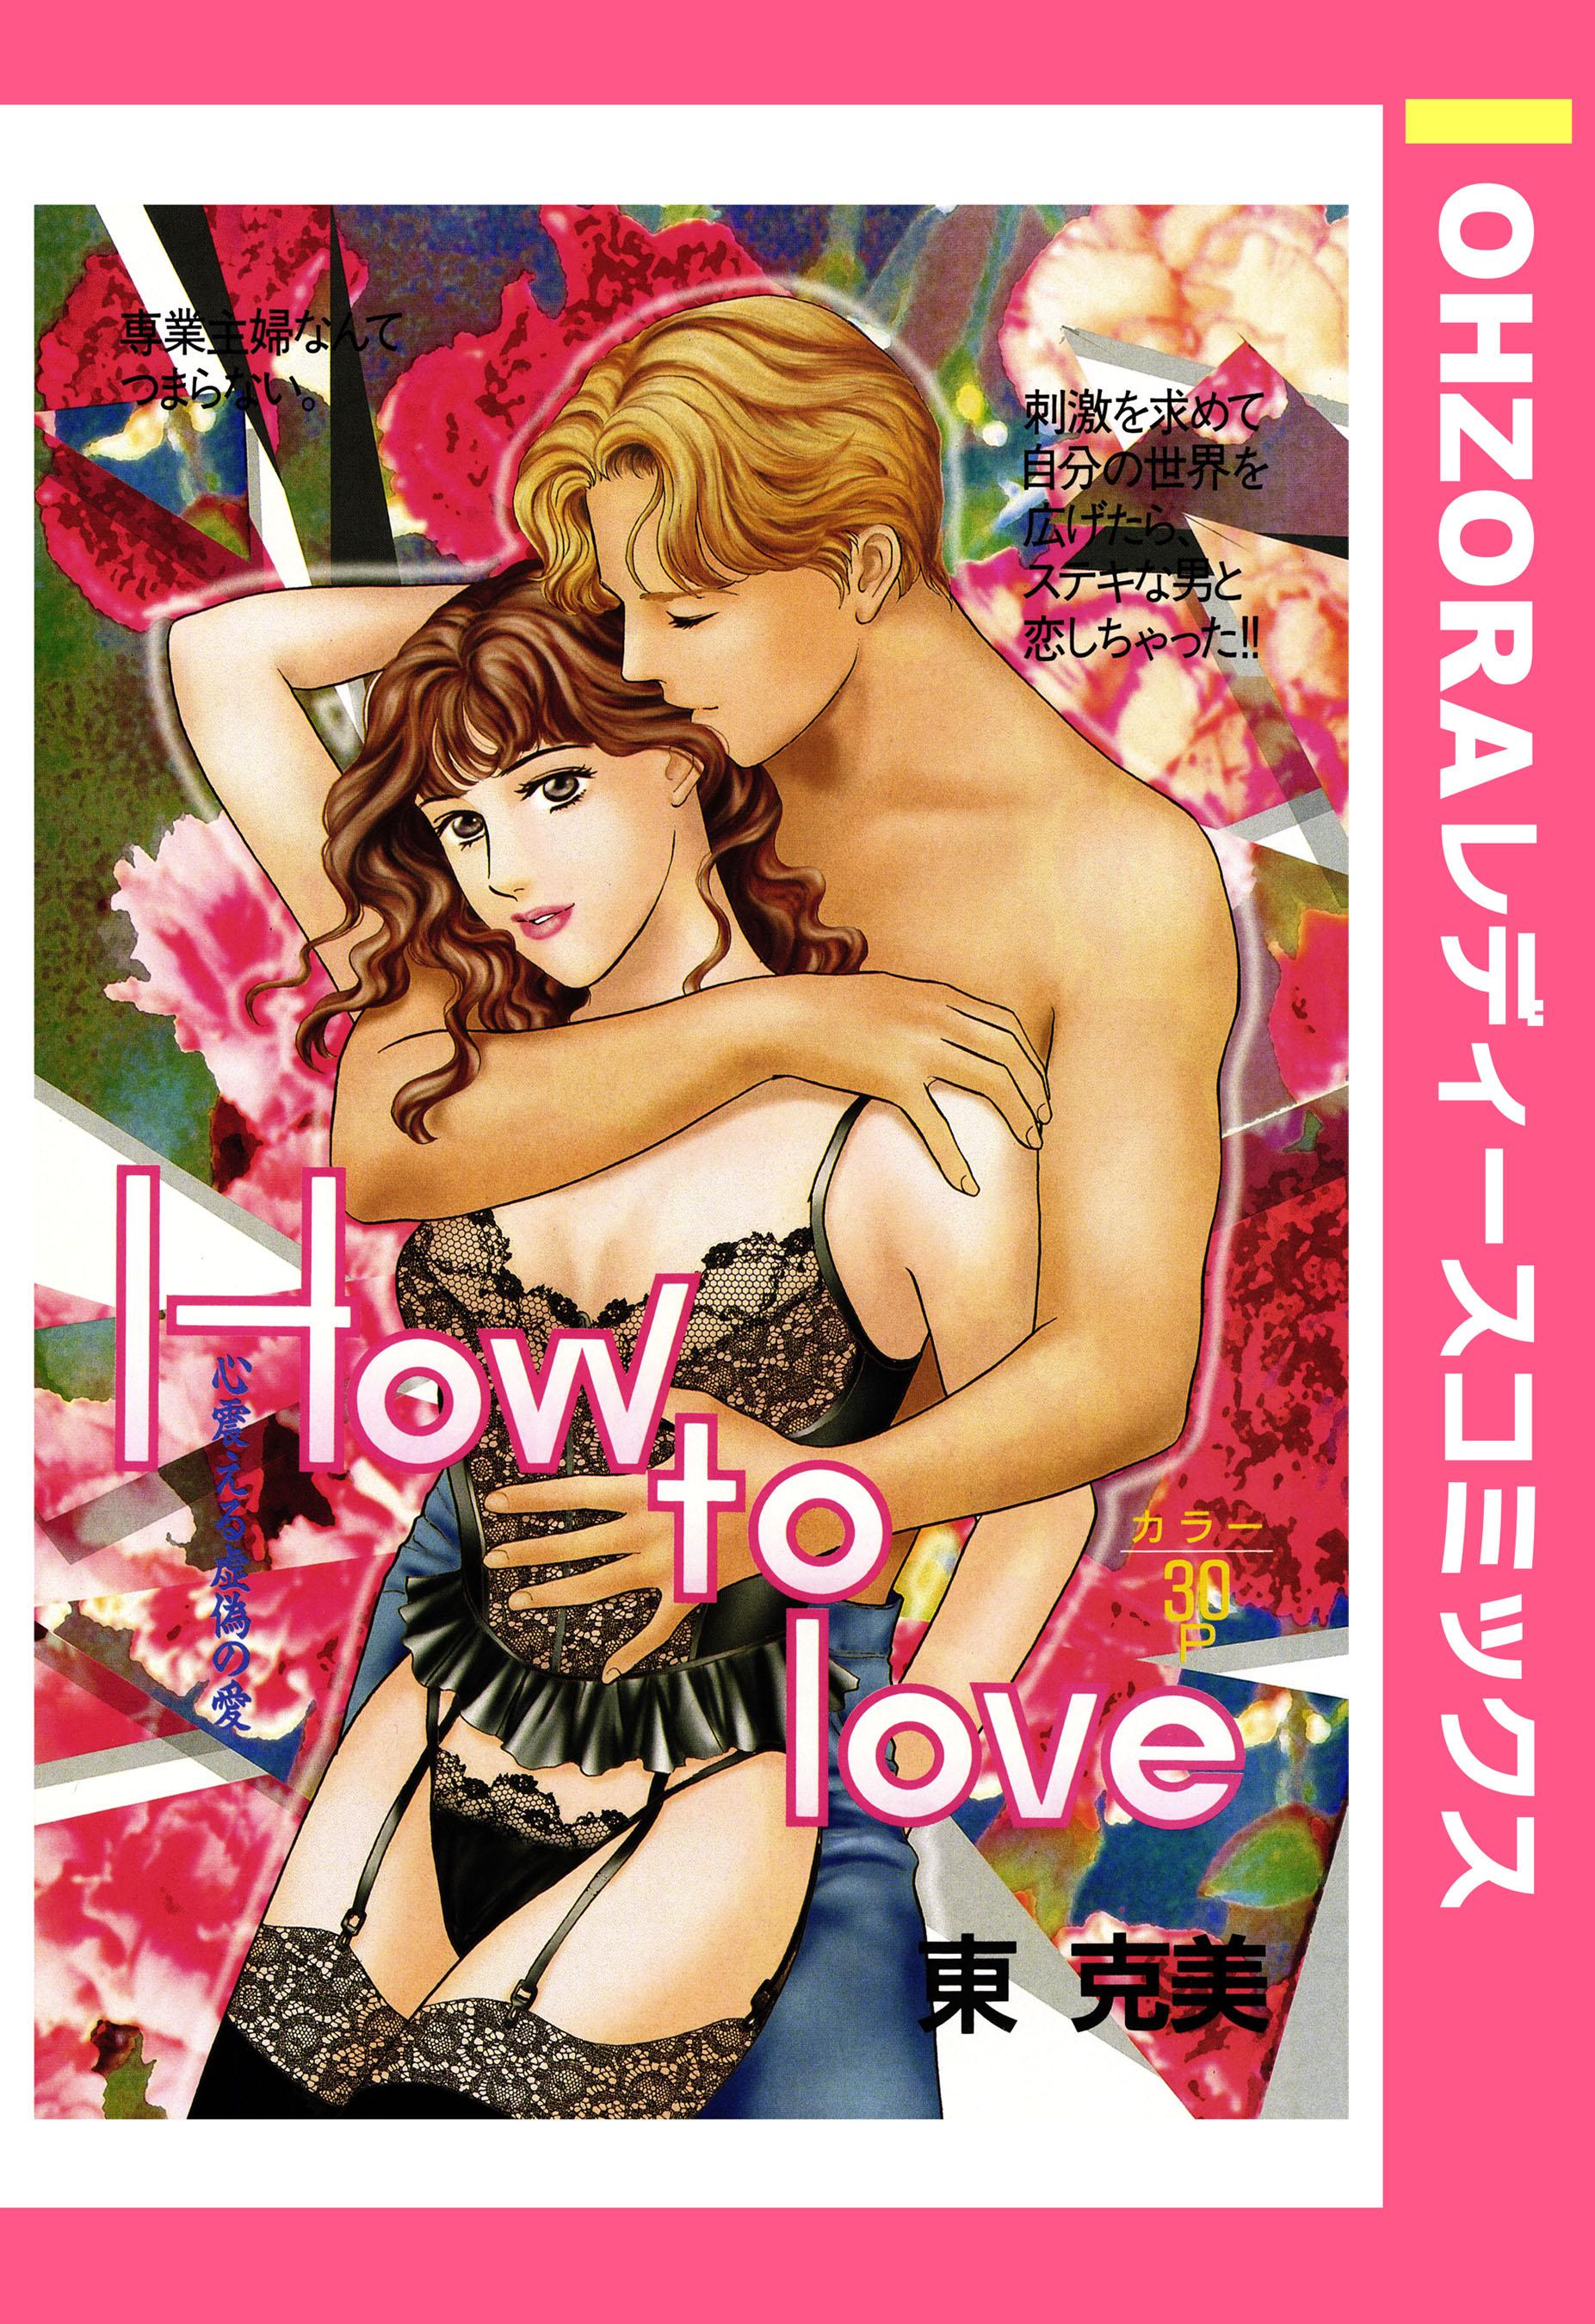 How to love 【単話売】